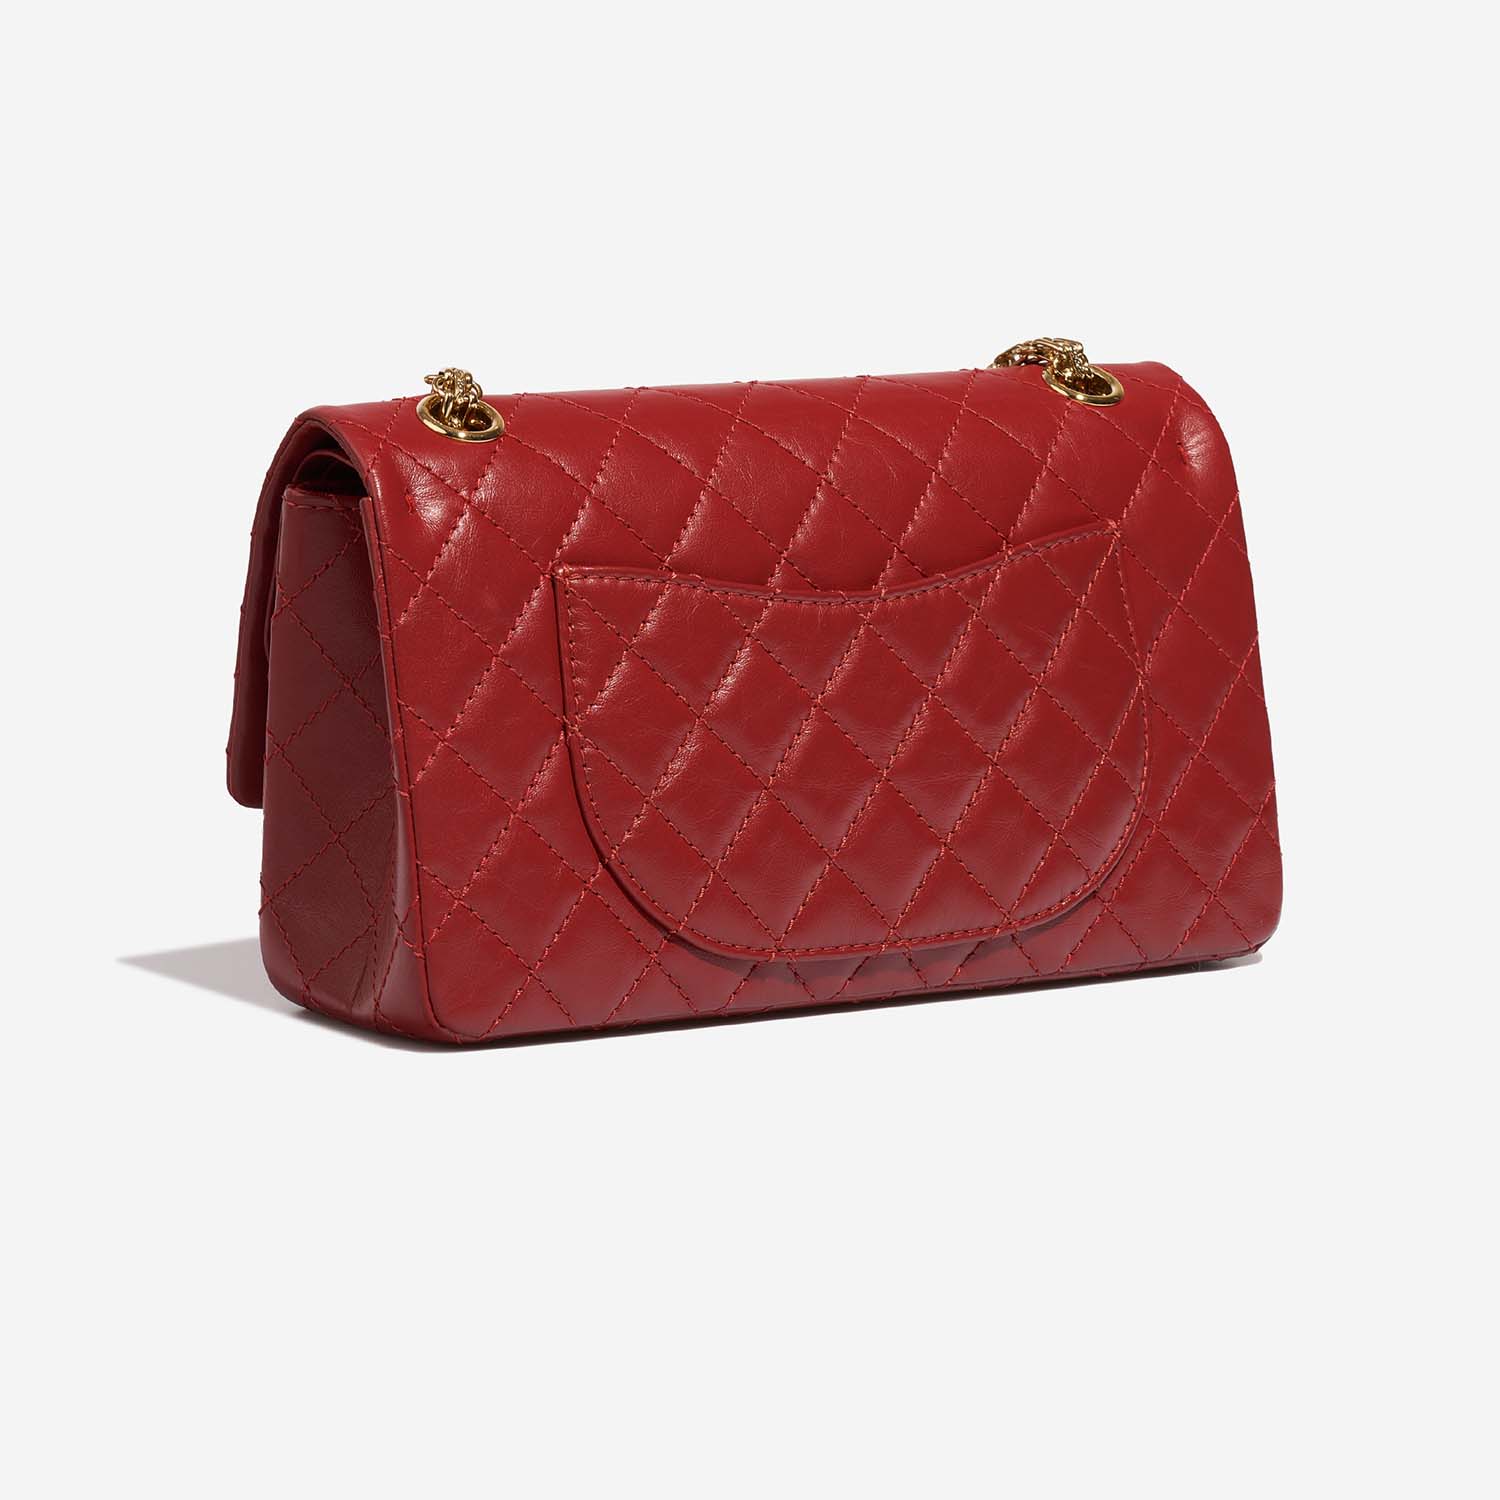 Chanel 2.55 Reissue 225 Lamb Red